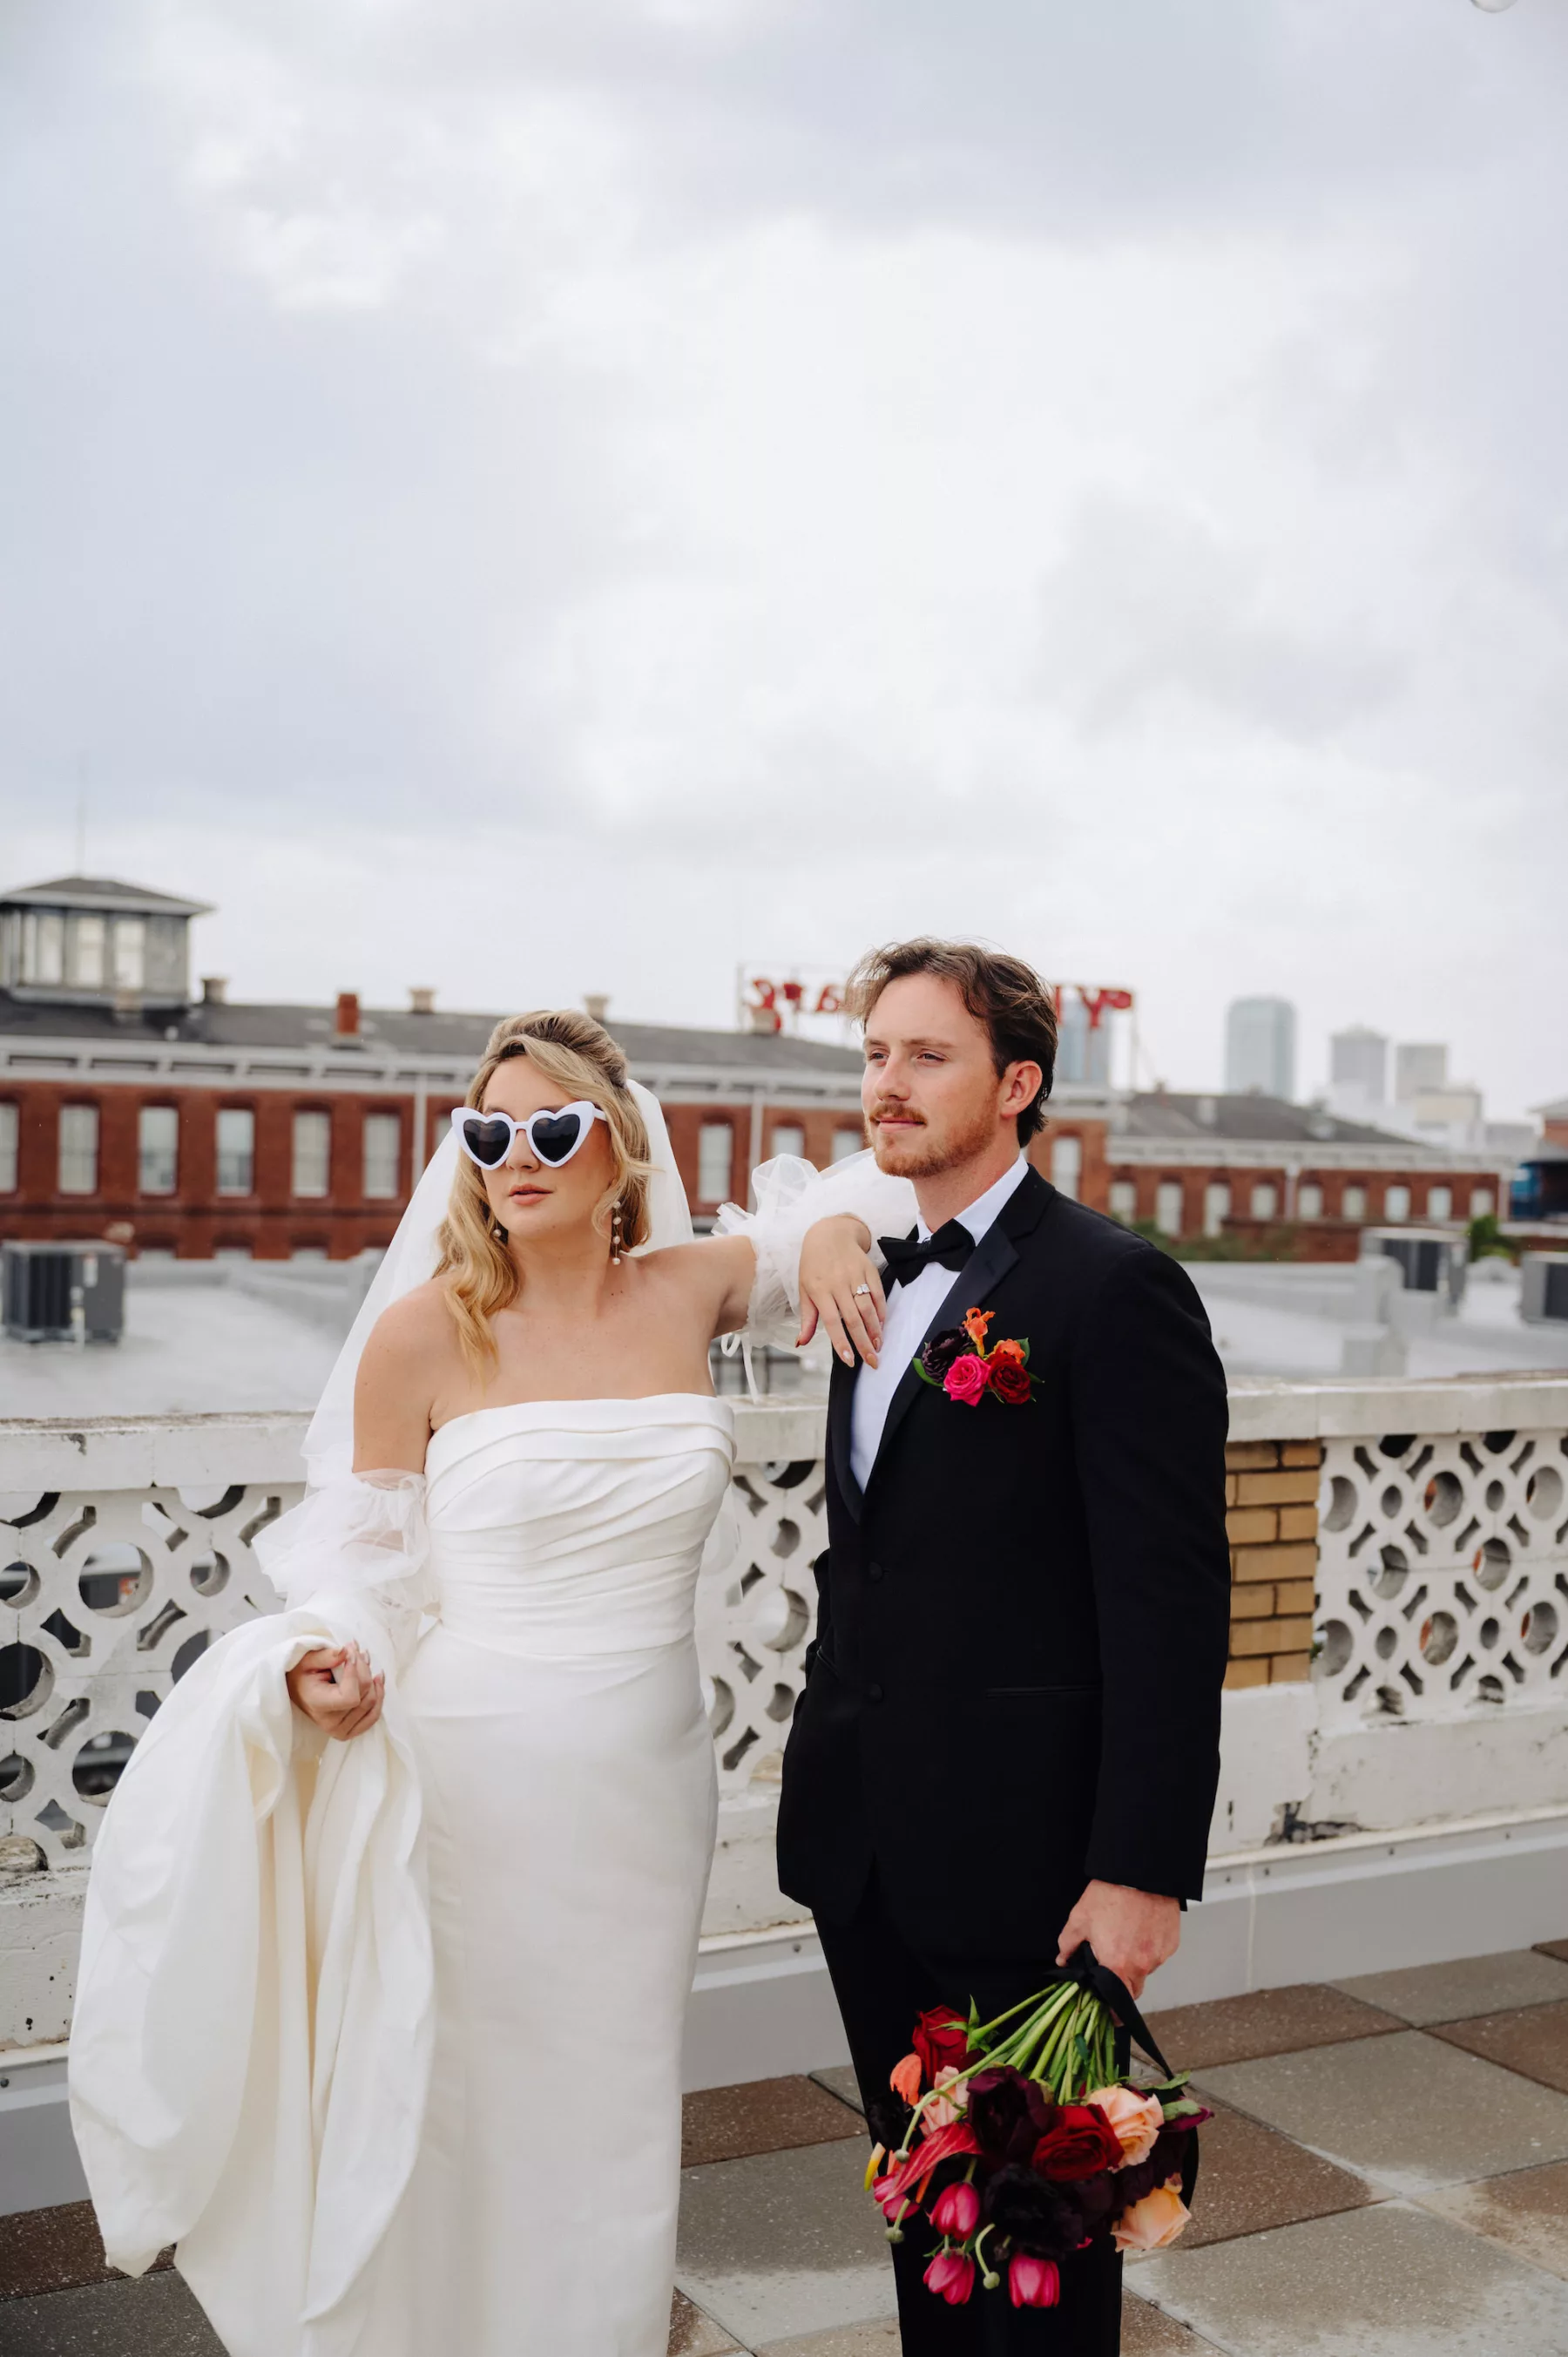 Bride and Groom Rooftop Wedding Portrait | Tampa Bay Photographer McNeile Photography | Planner EventFull Weddings